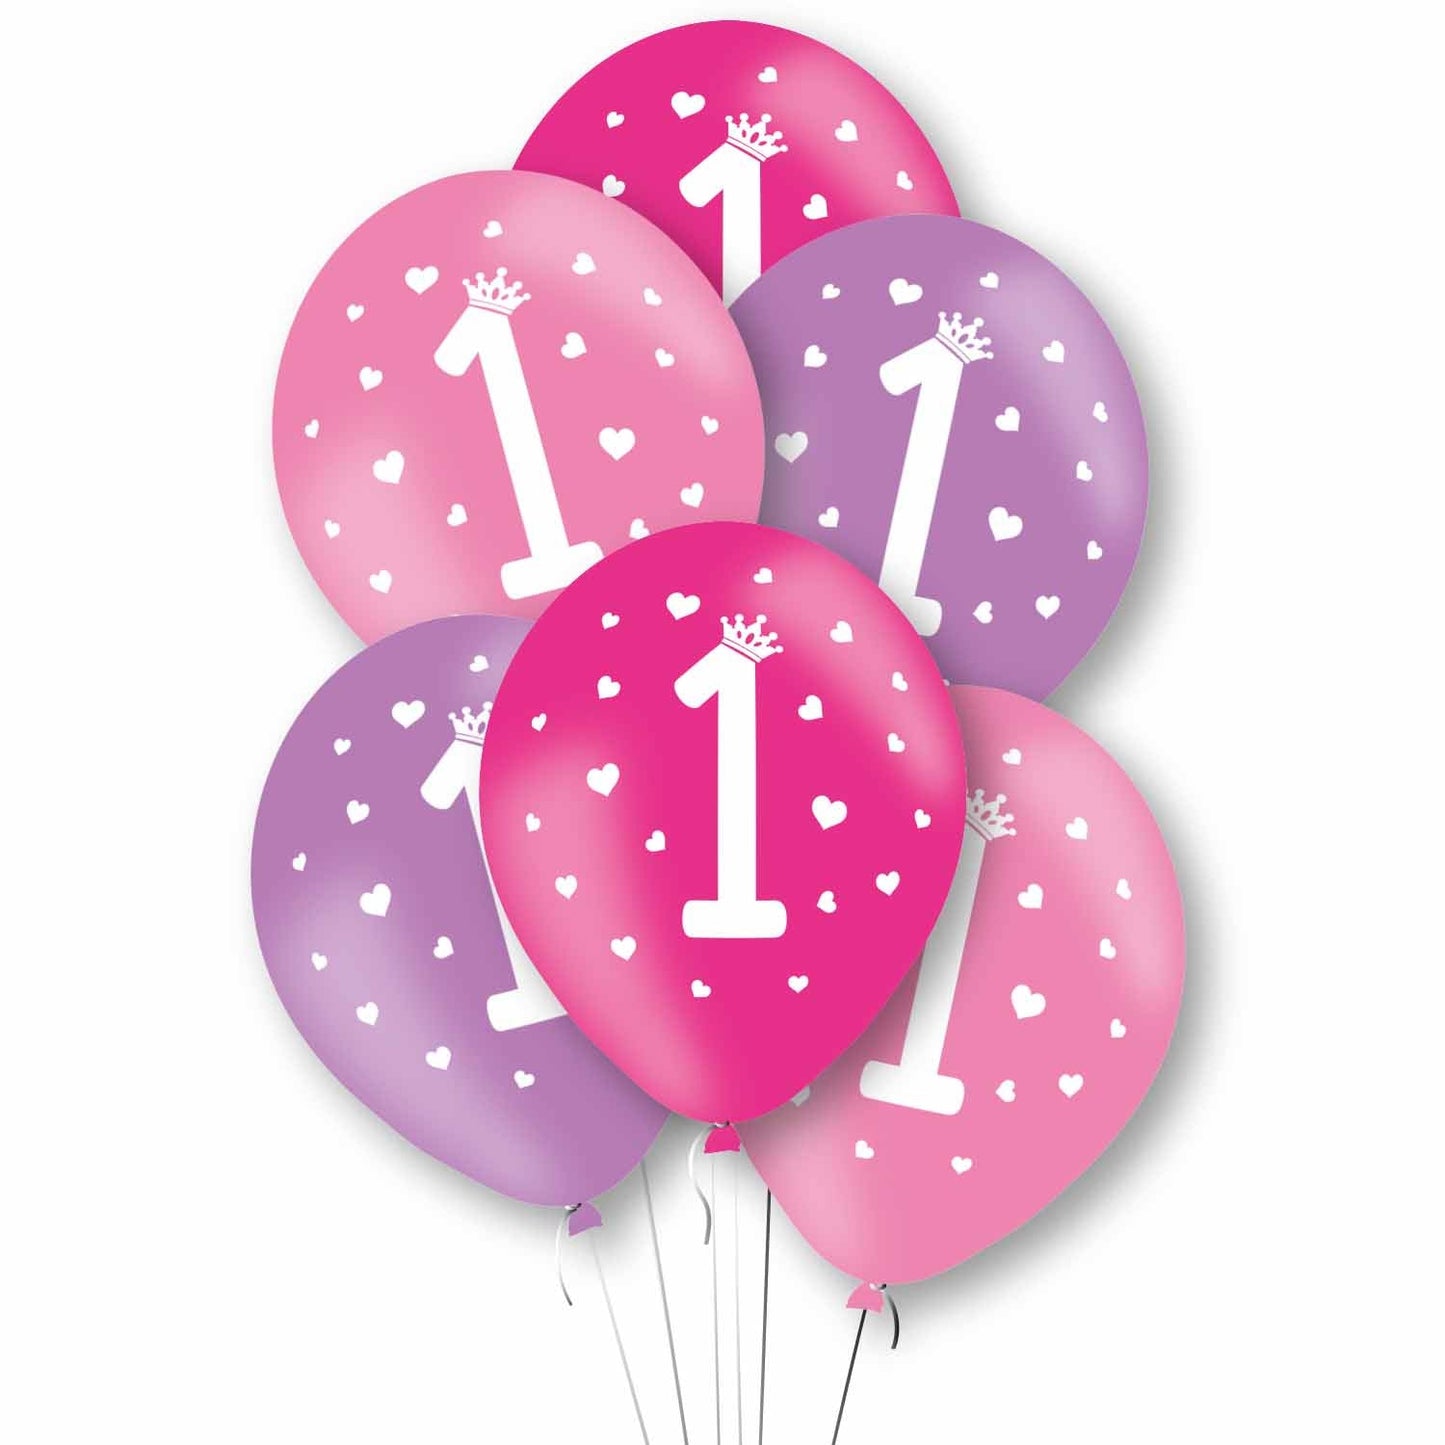 11 inch Age 1 Pink Latex Balloons, Pack of 6